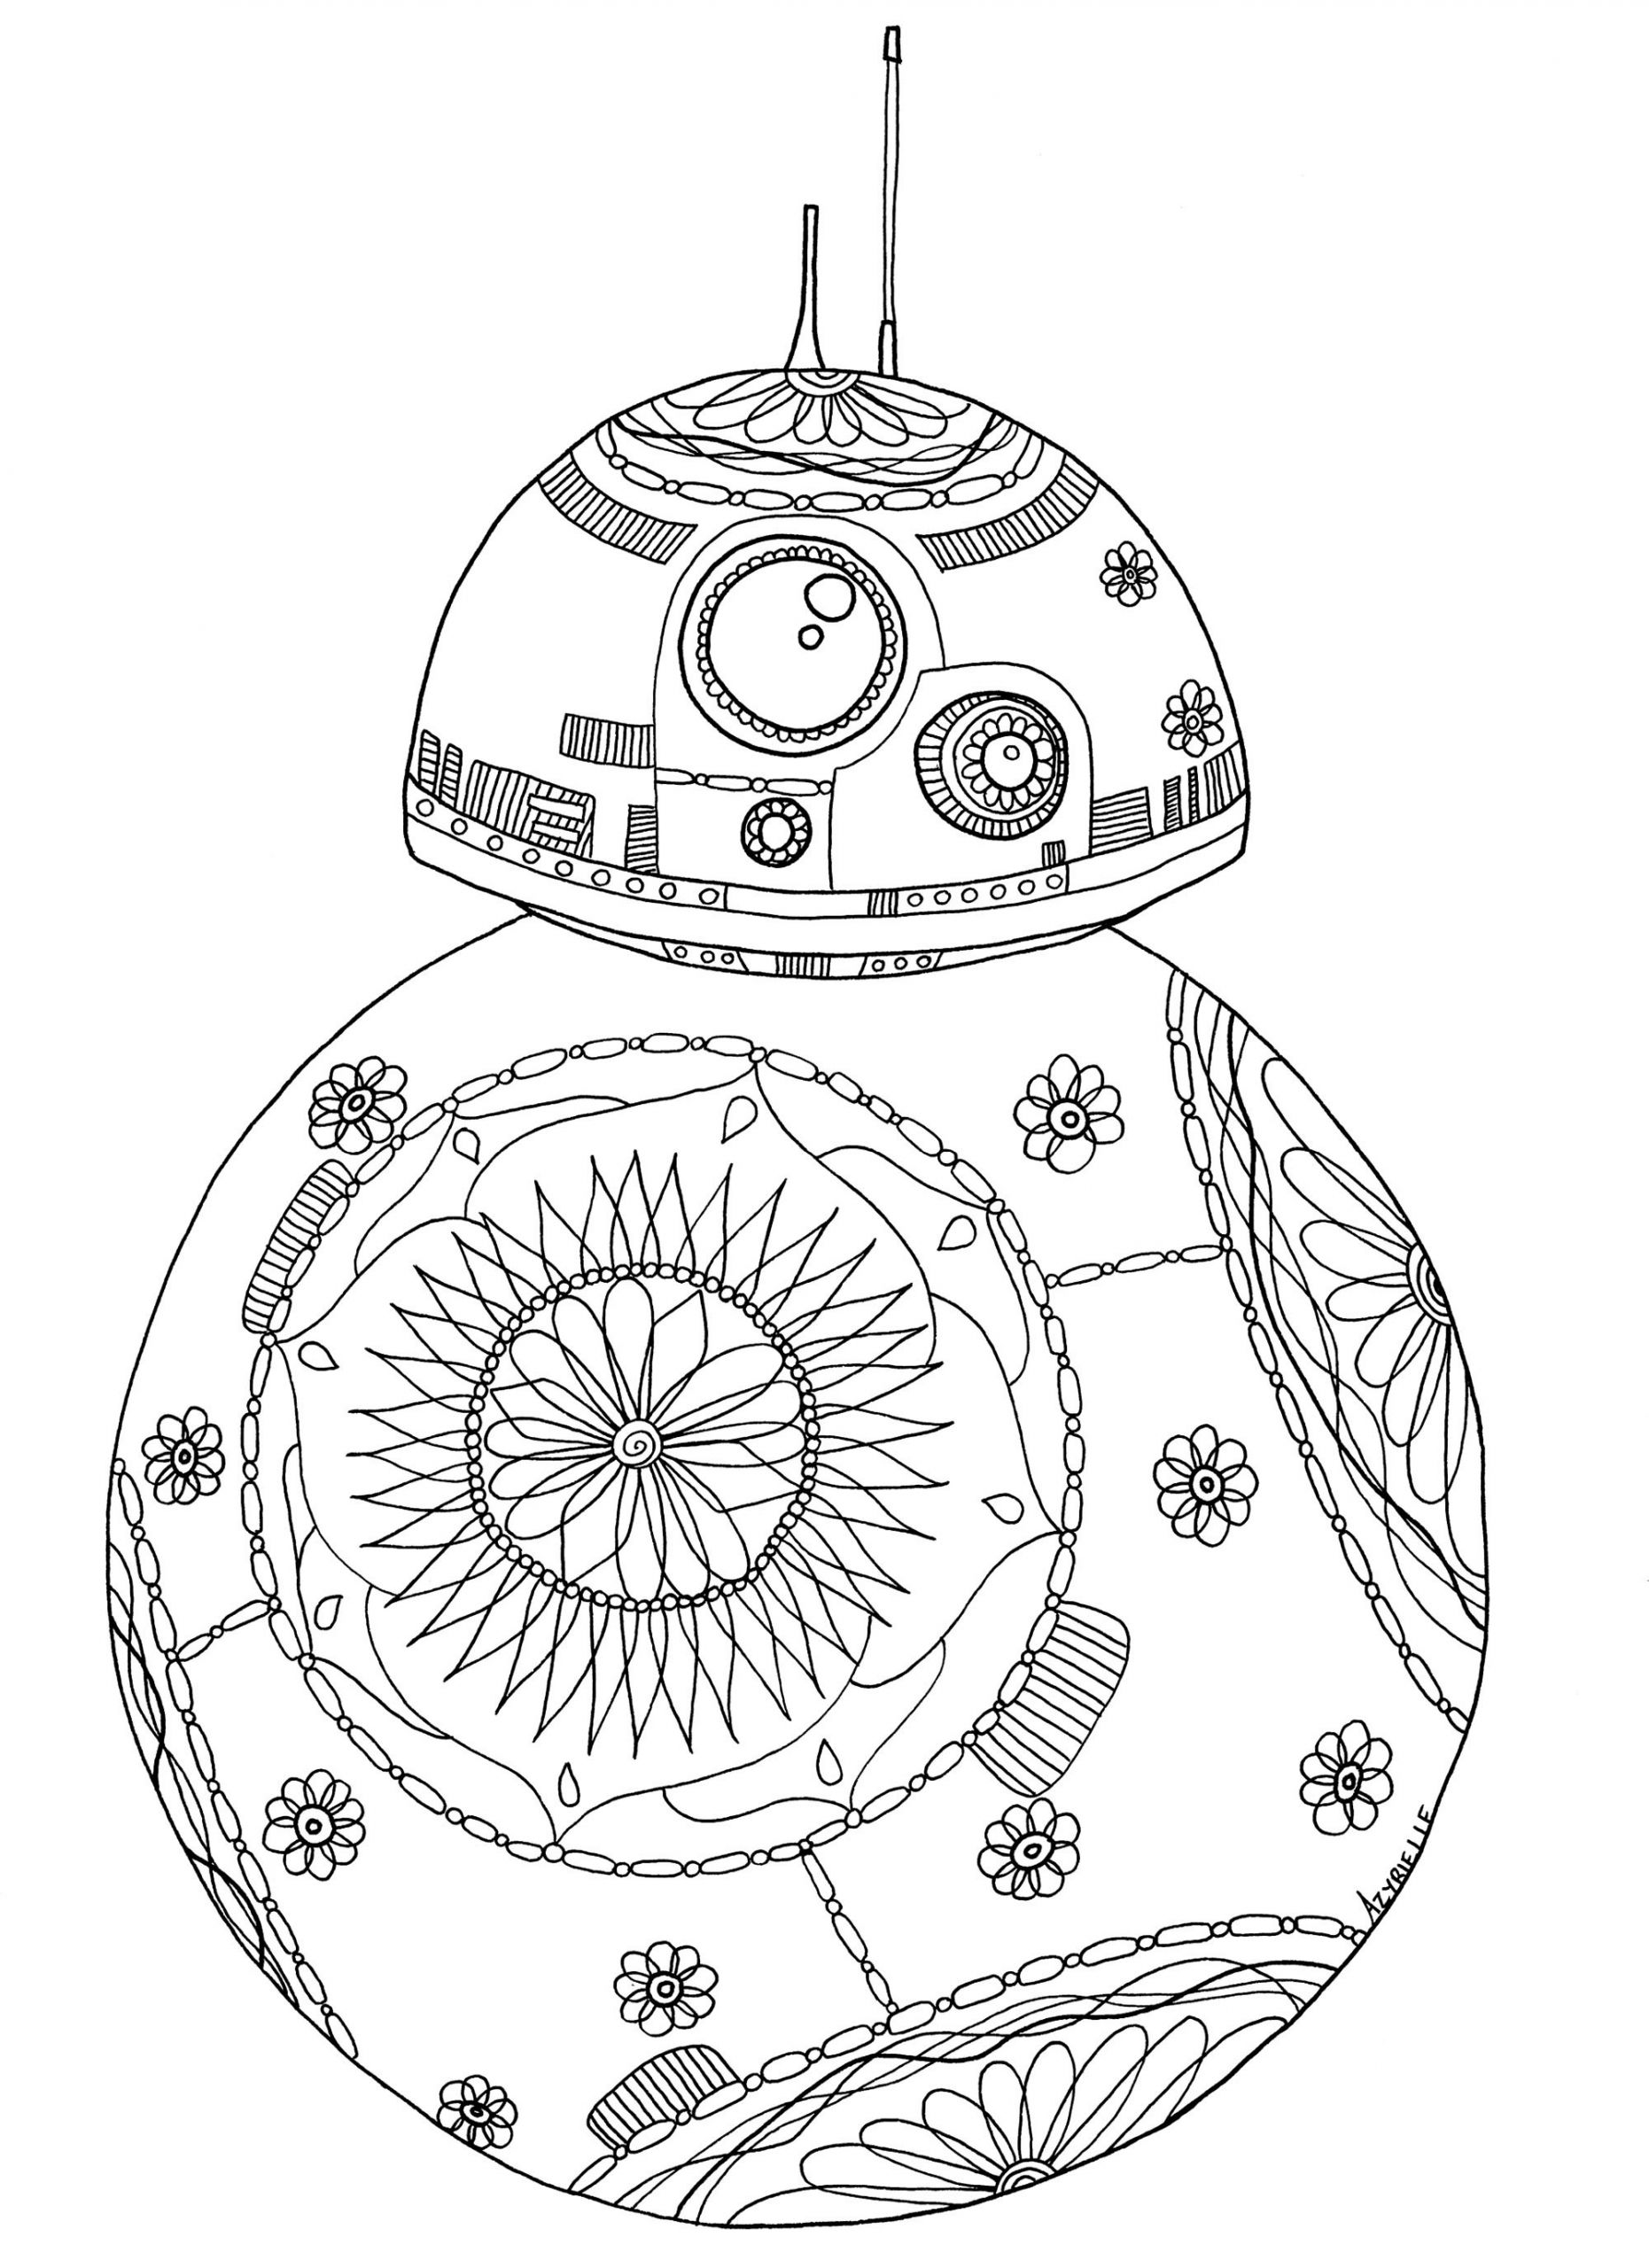 Star Wars Adult Coloring Book
 Star wars Coloring Pages for Adults